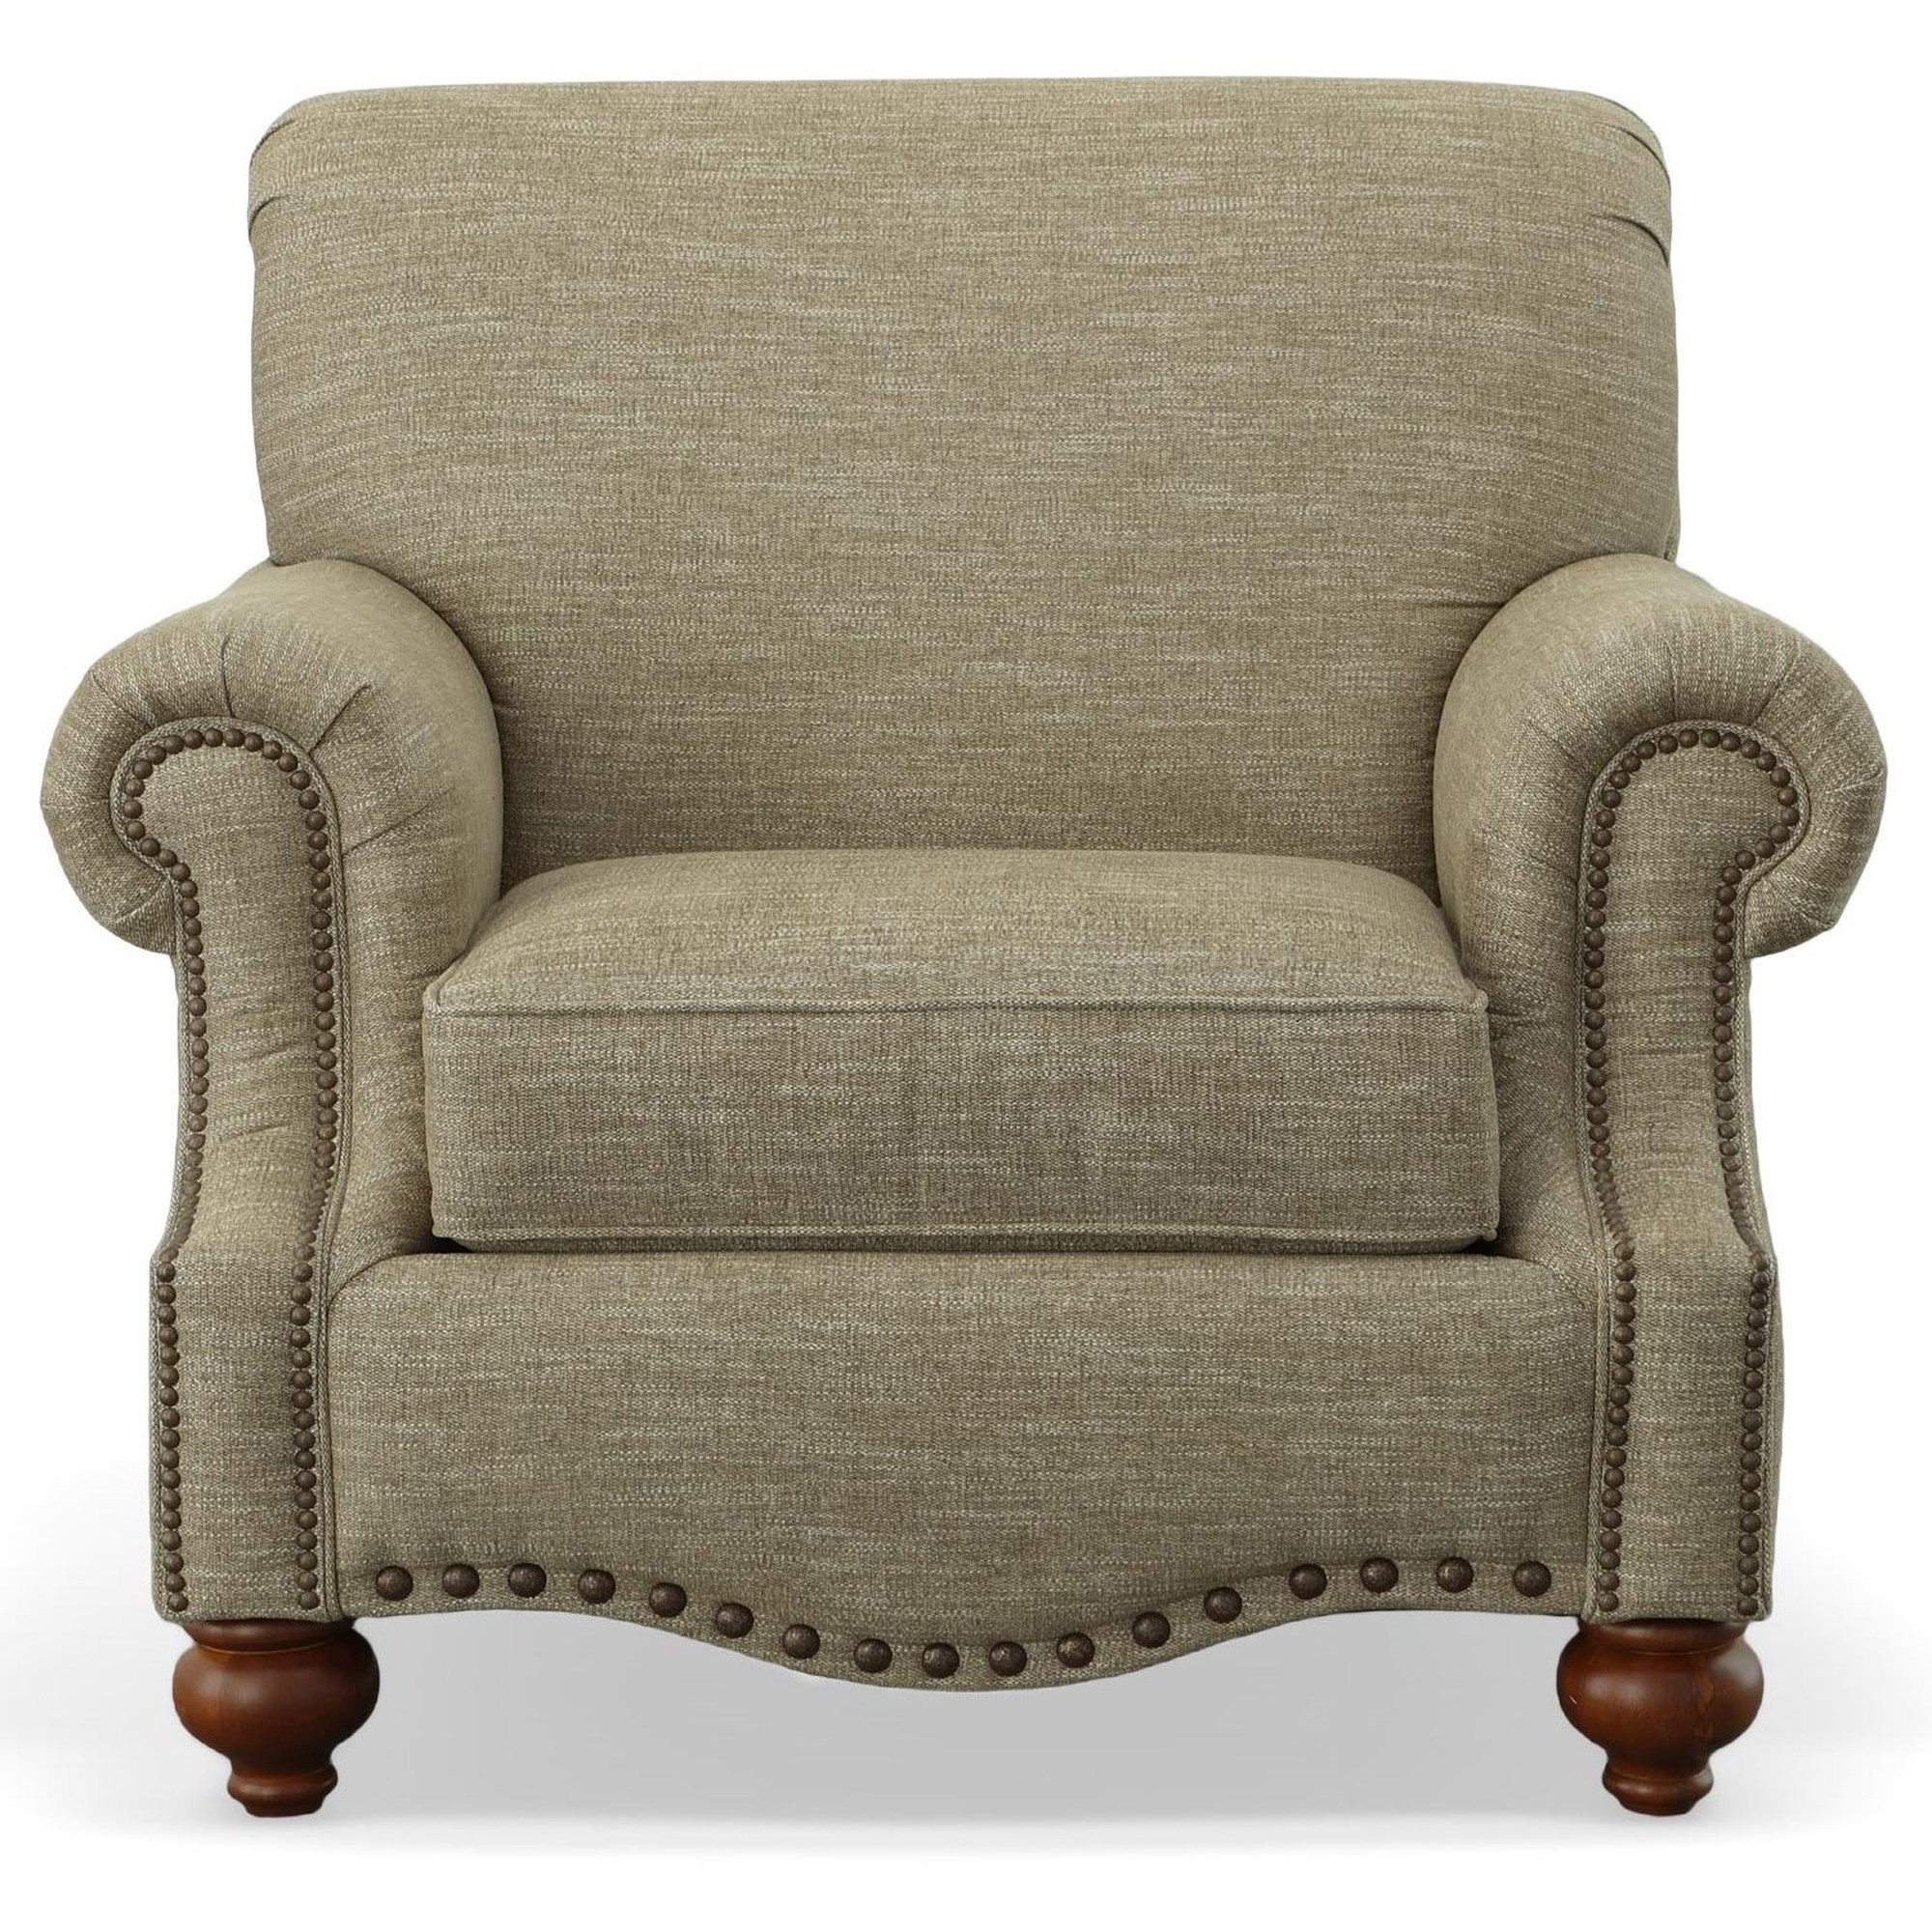 Esprit Hunt Club Decor | Furnishings | Upholstered Traditional Bassett with 2697-12-1579-18M Chair Chairs Arms Home Rolled